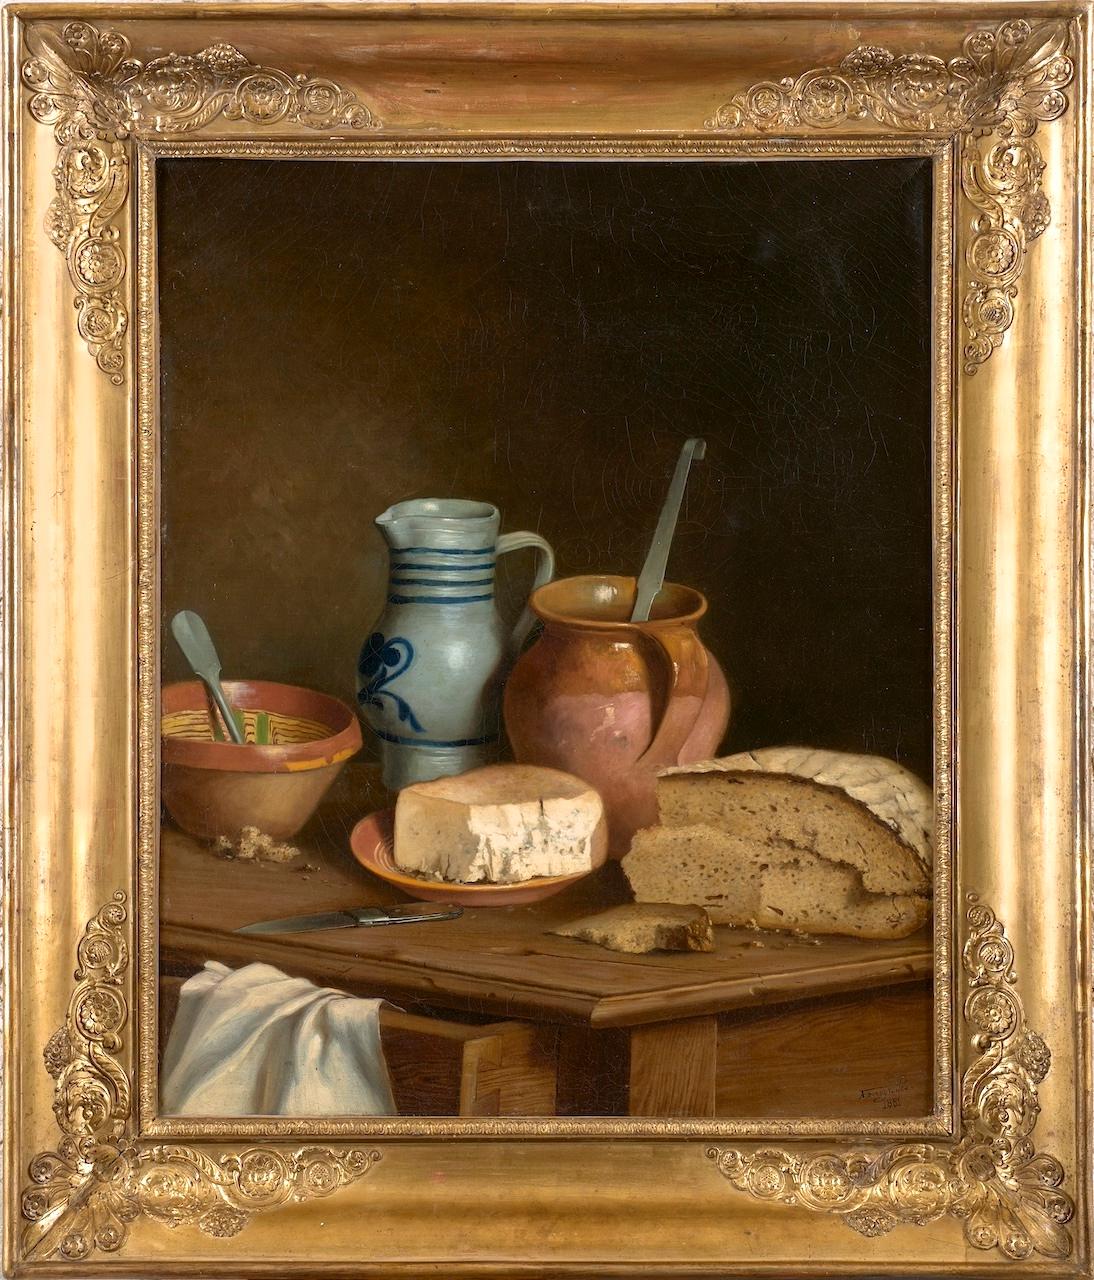 Bread, fourme de Rochefort-Montagne and pottery on a wooden table - French School Painting by A. FERREYROLLES